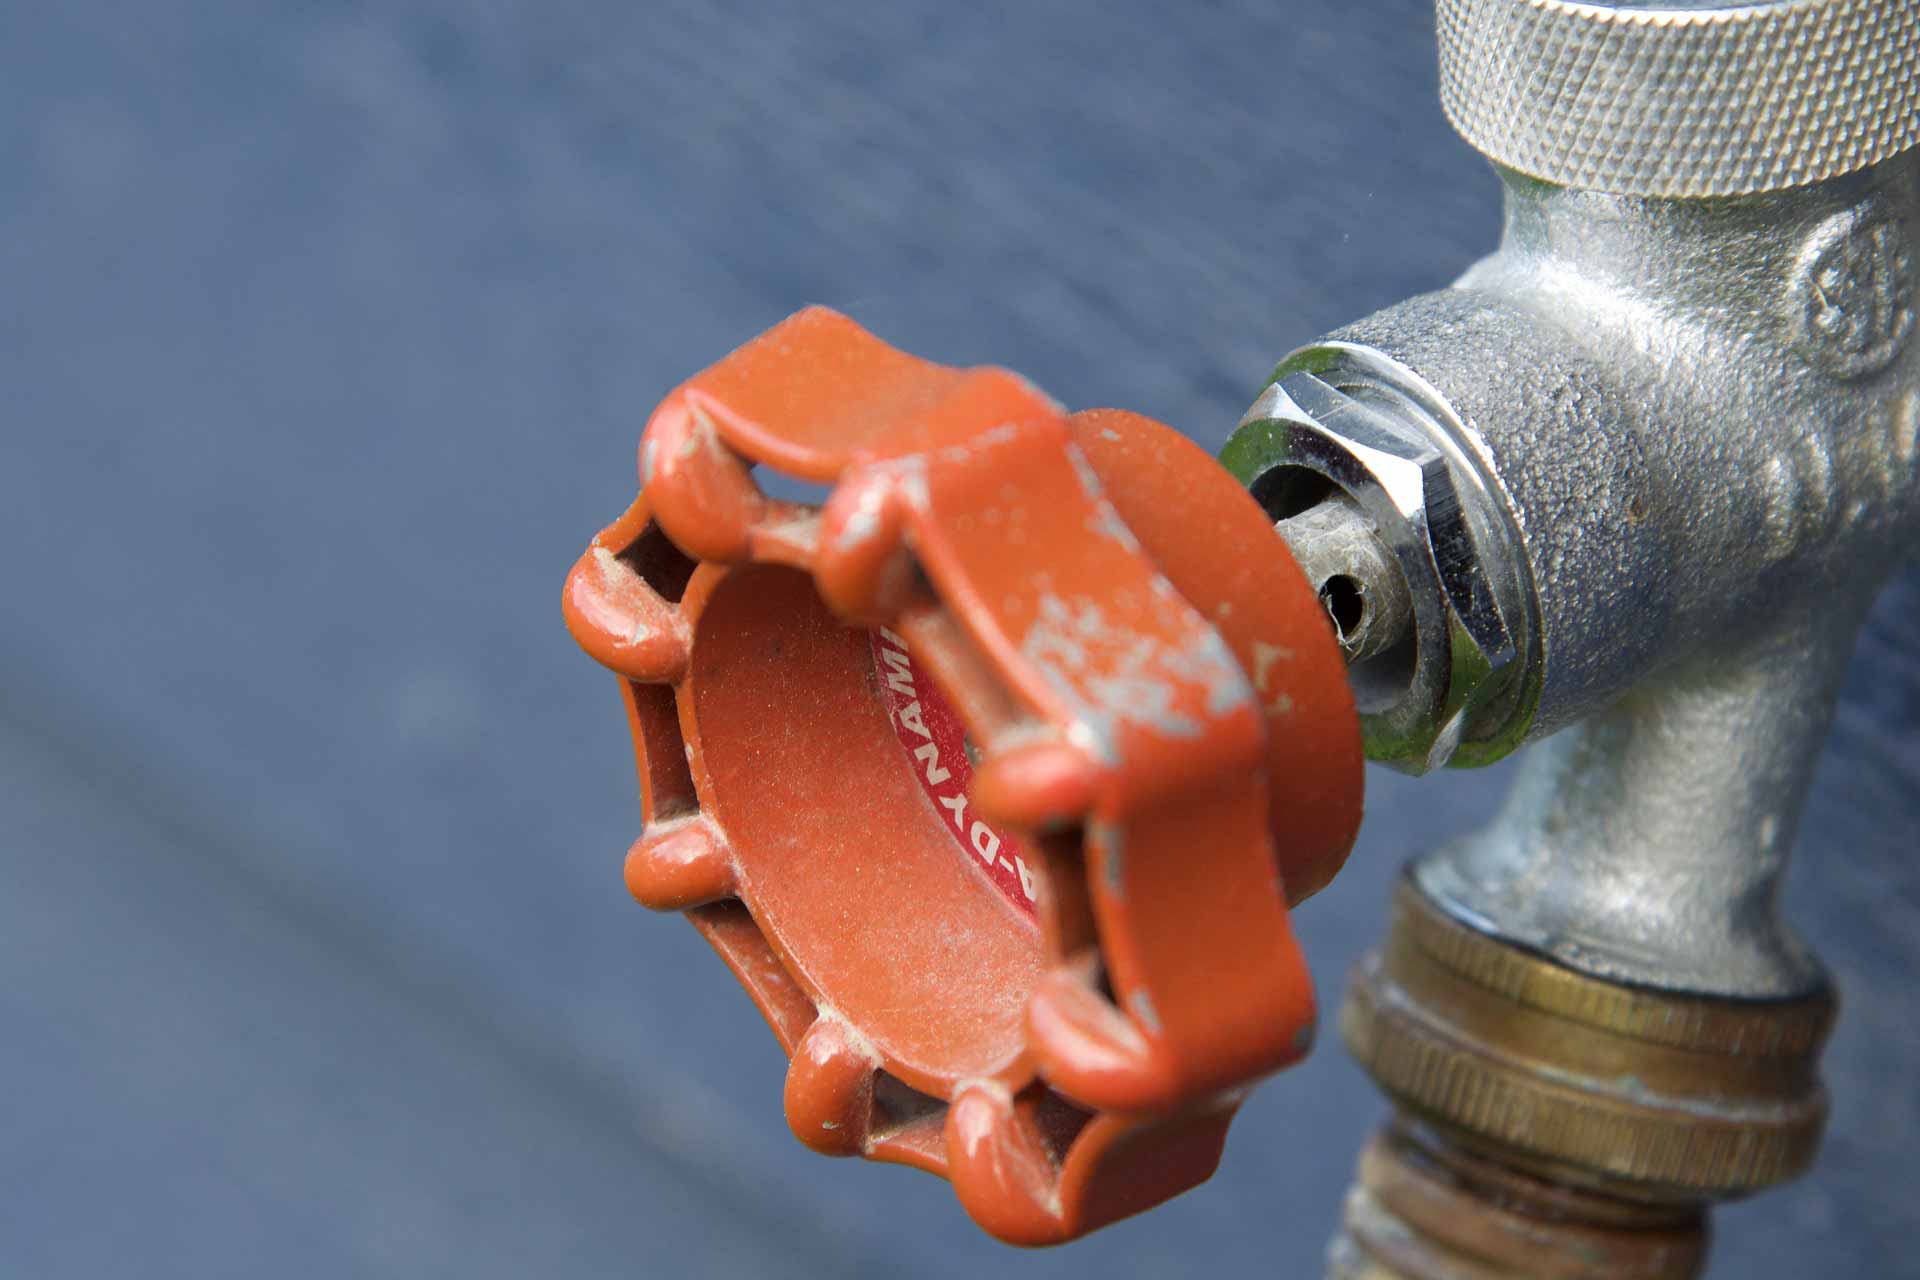 Close-up on a water heater valve